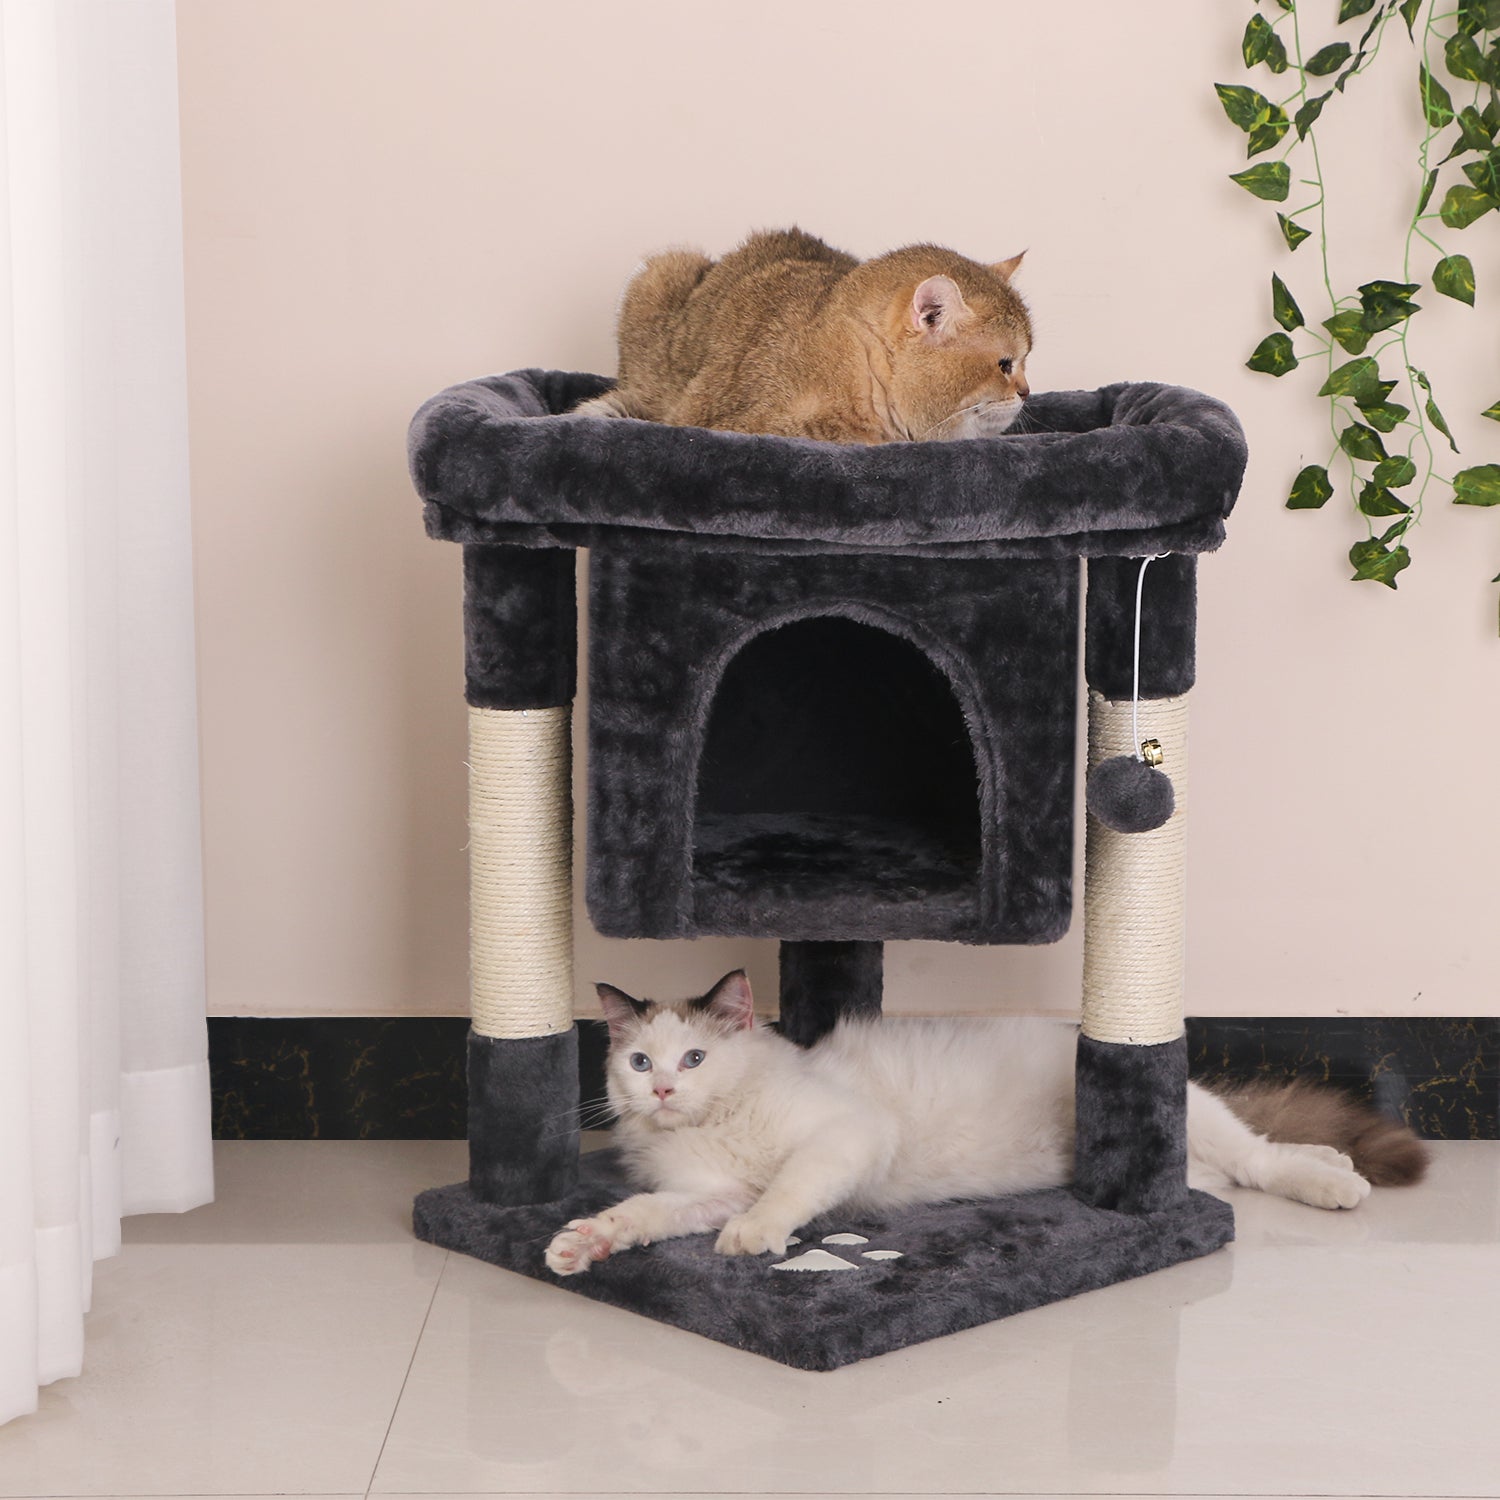 BEWISHOME Cat Tree Cat House Cat Condo with Sisal Scratching Posts, Plush Perch, Cat Tower Furniture Cat Bed Kitty Activity Center Kitten Play House MMJ08B